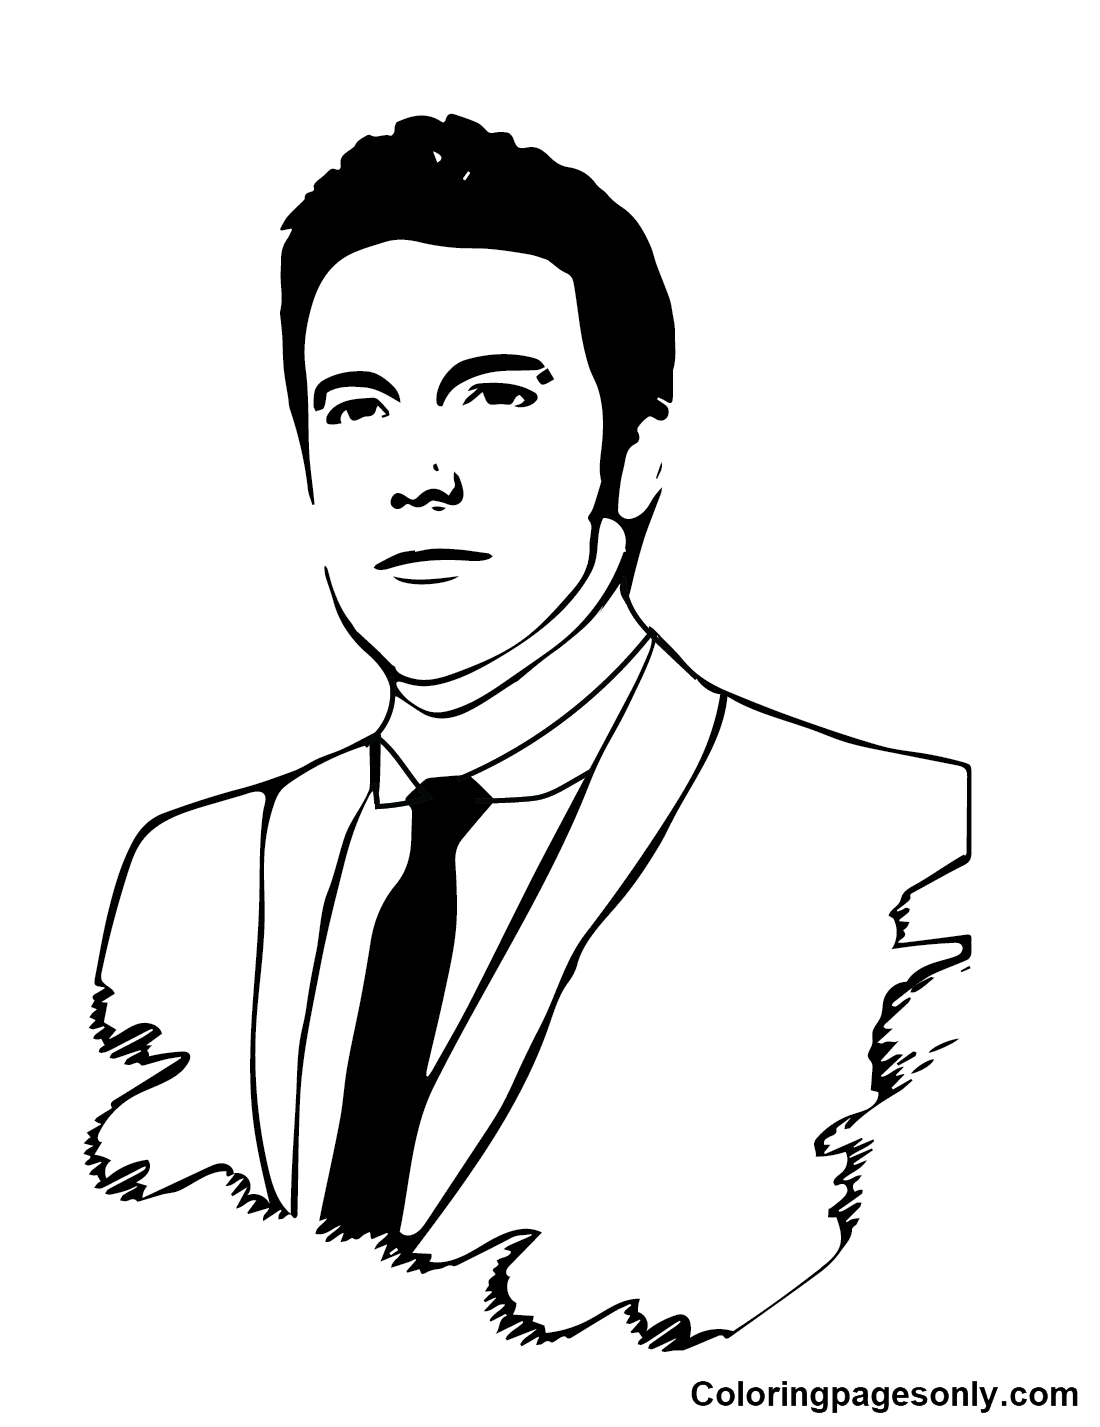 Free Ben Affleck Images Coloring Page